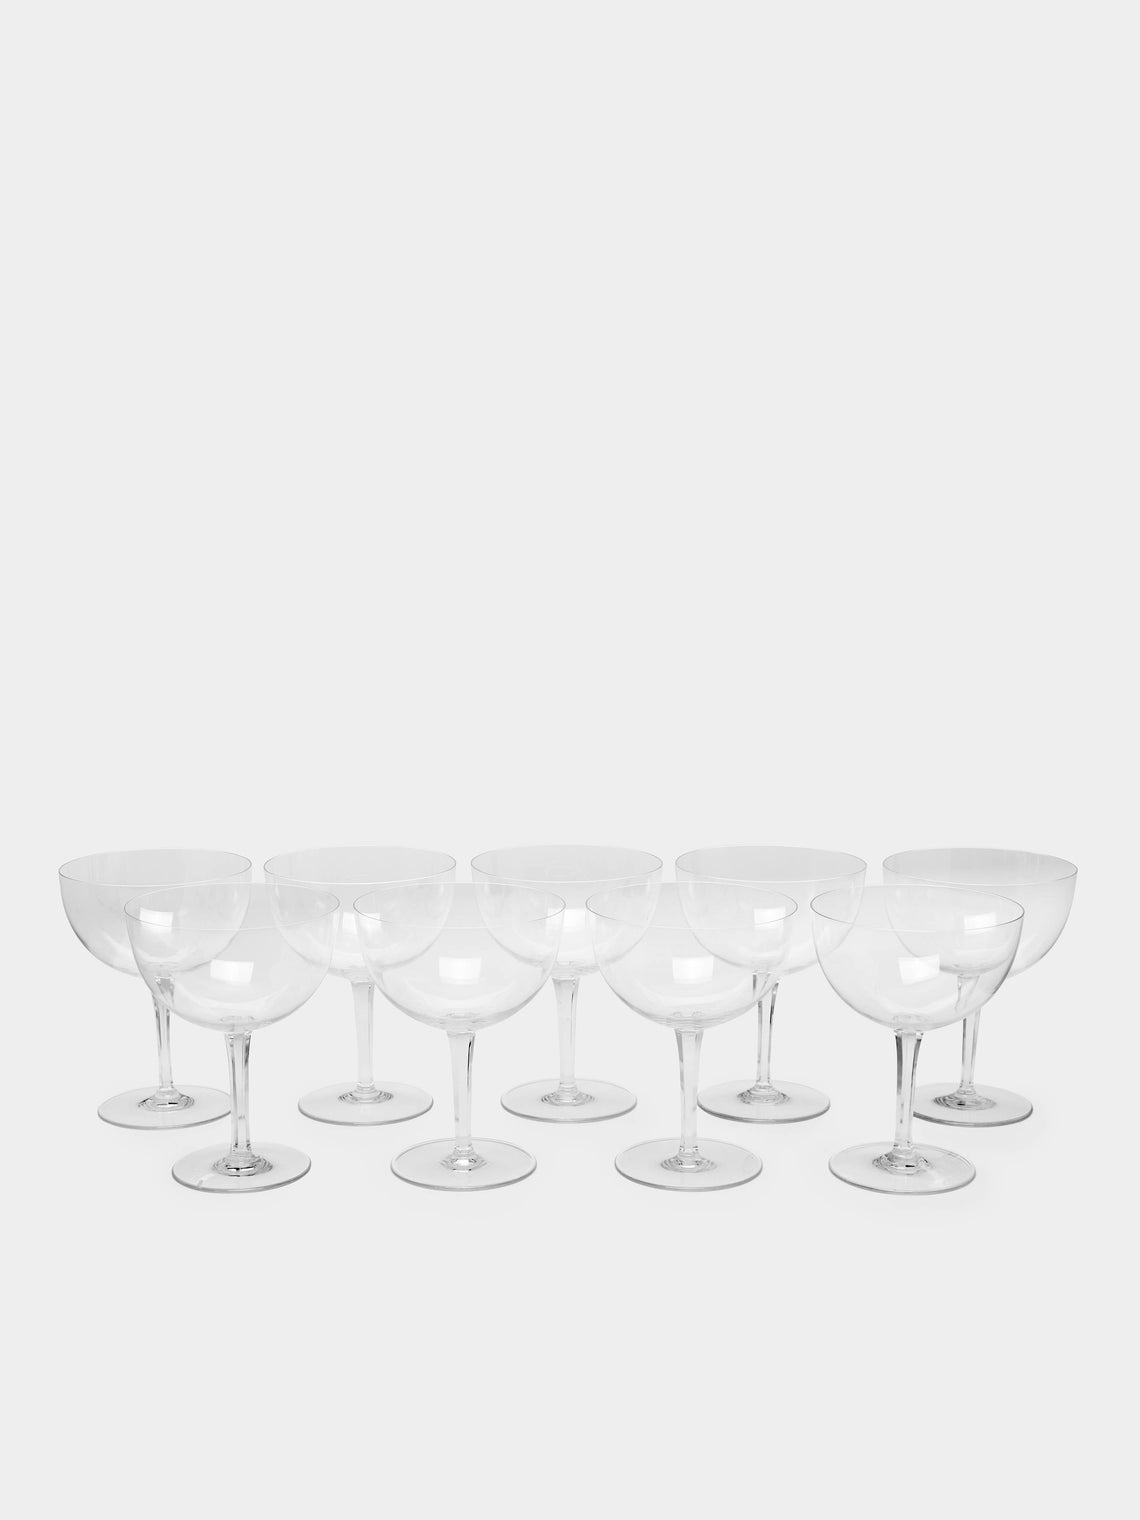 Antique and Vintage - 1930s Baccarat Crystal Large Coupes (Set of 9) -  - ABASK